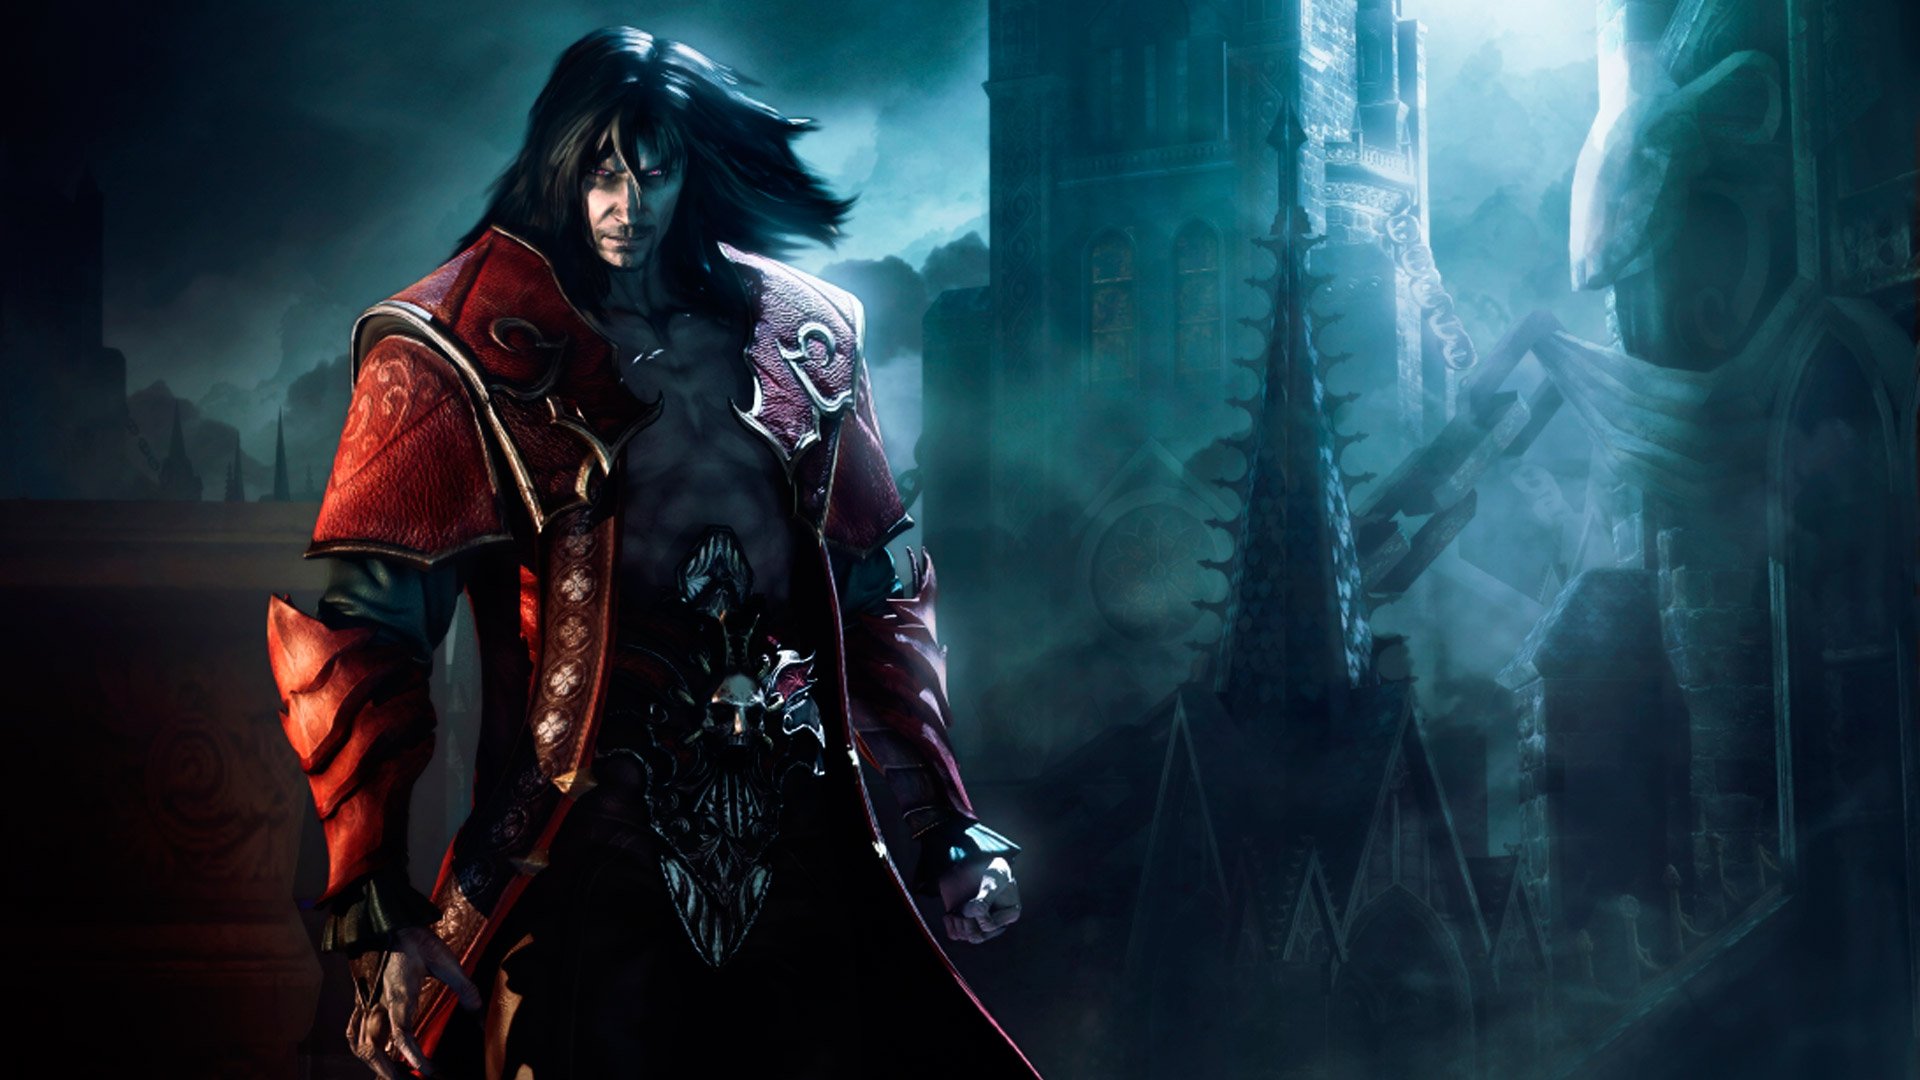  Shadow 2 You are downloading Castlevania Lords of Shadow 2 wallpaper